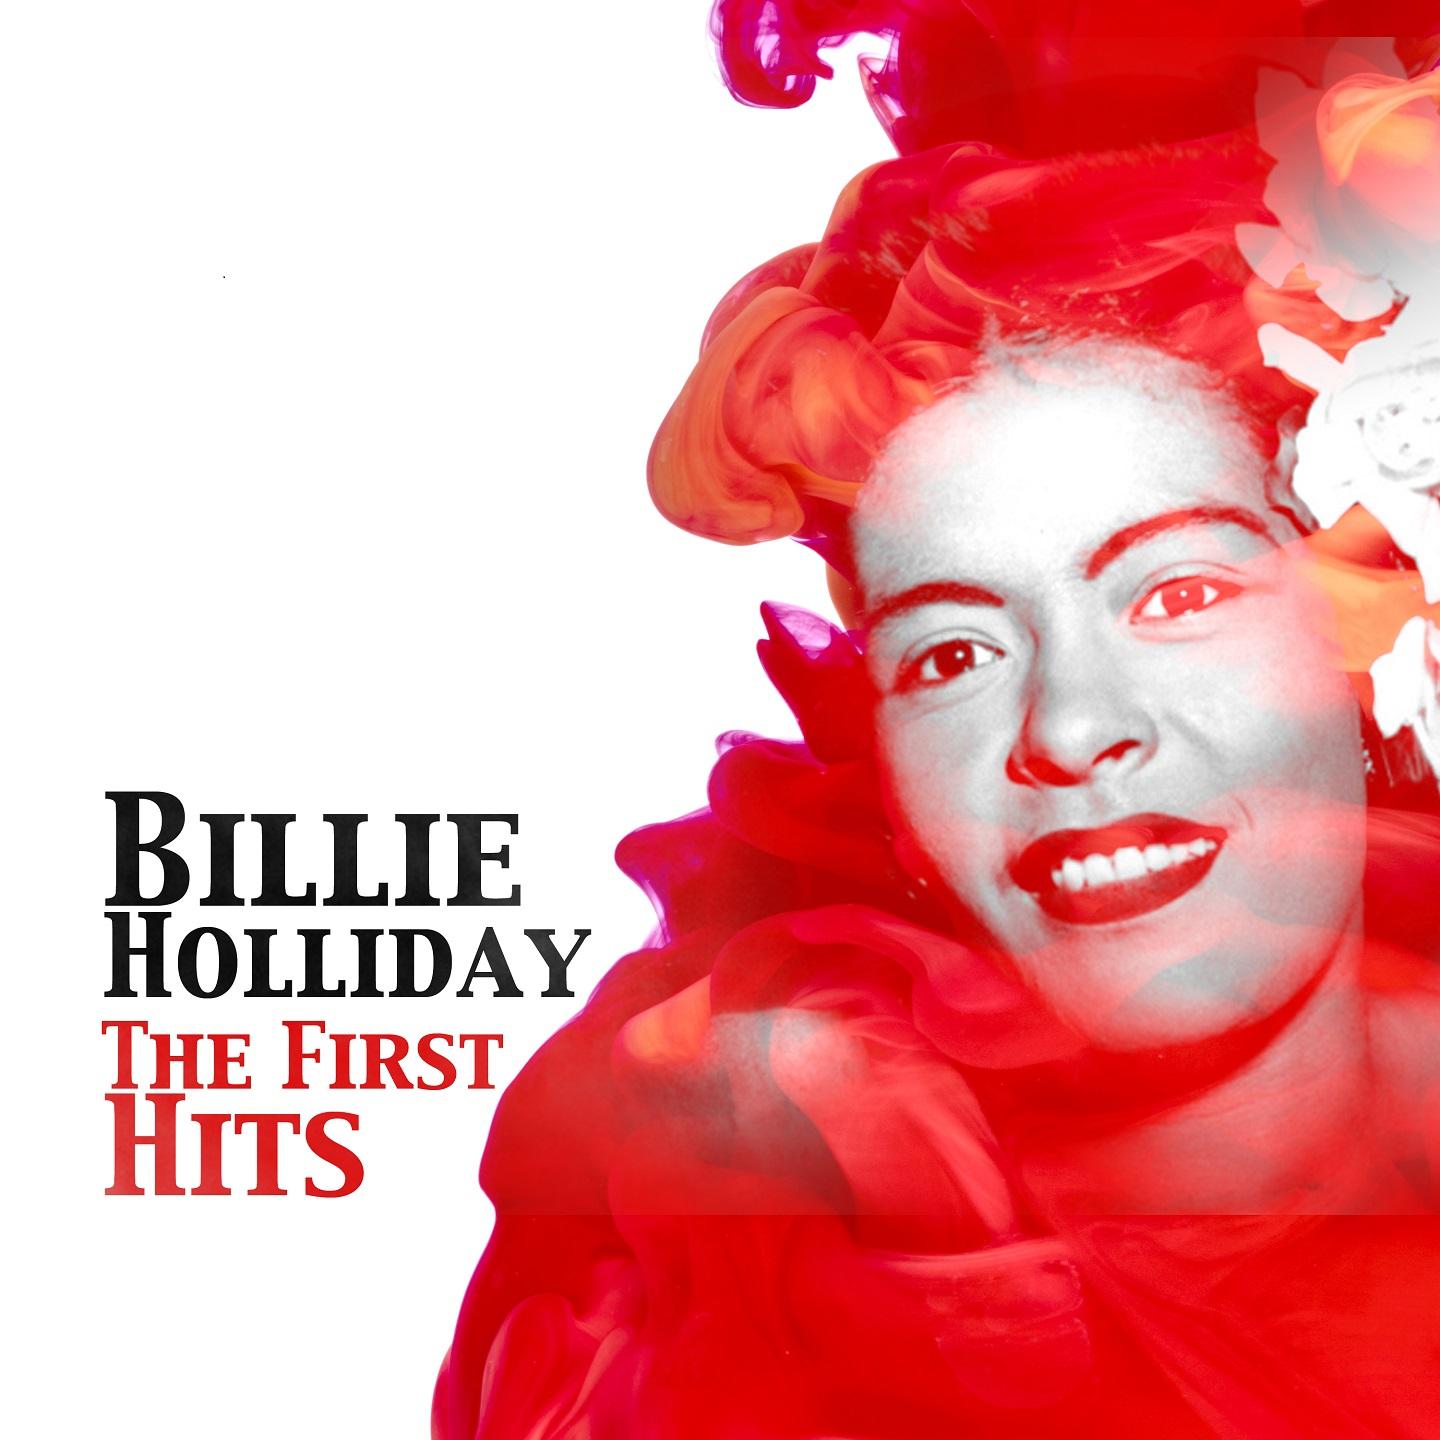 Bille Holiday / The First Hits -